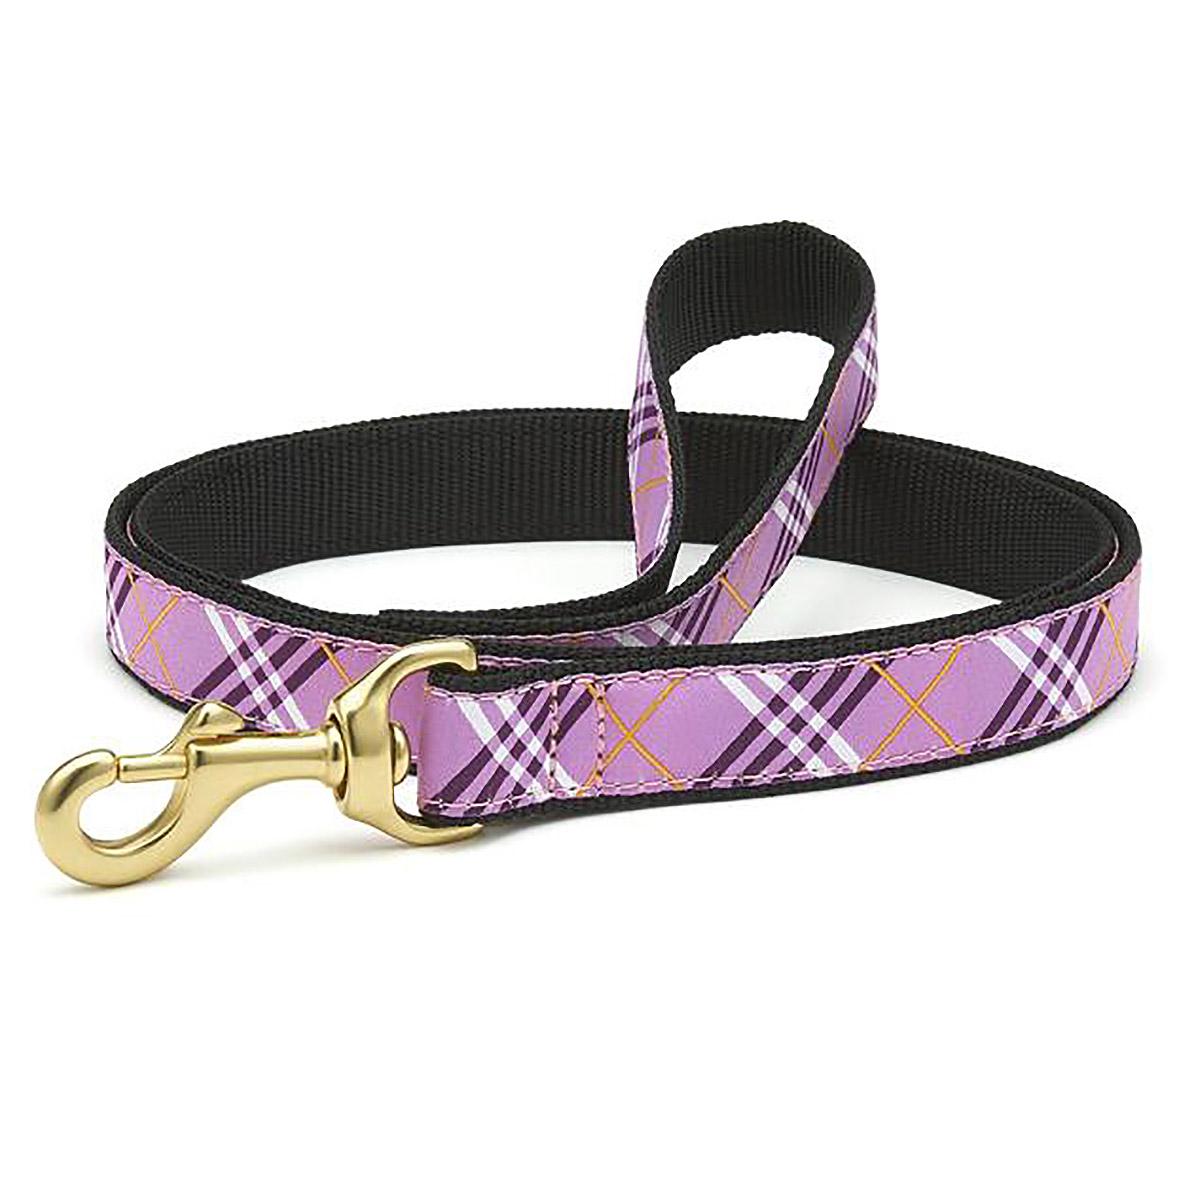 Lavender Lattice Dog Leash by Up Country